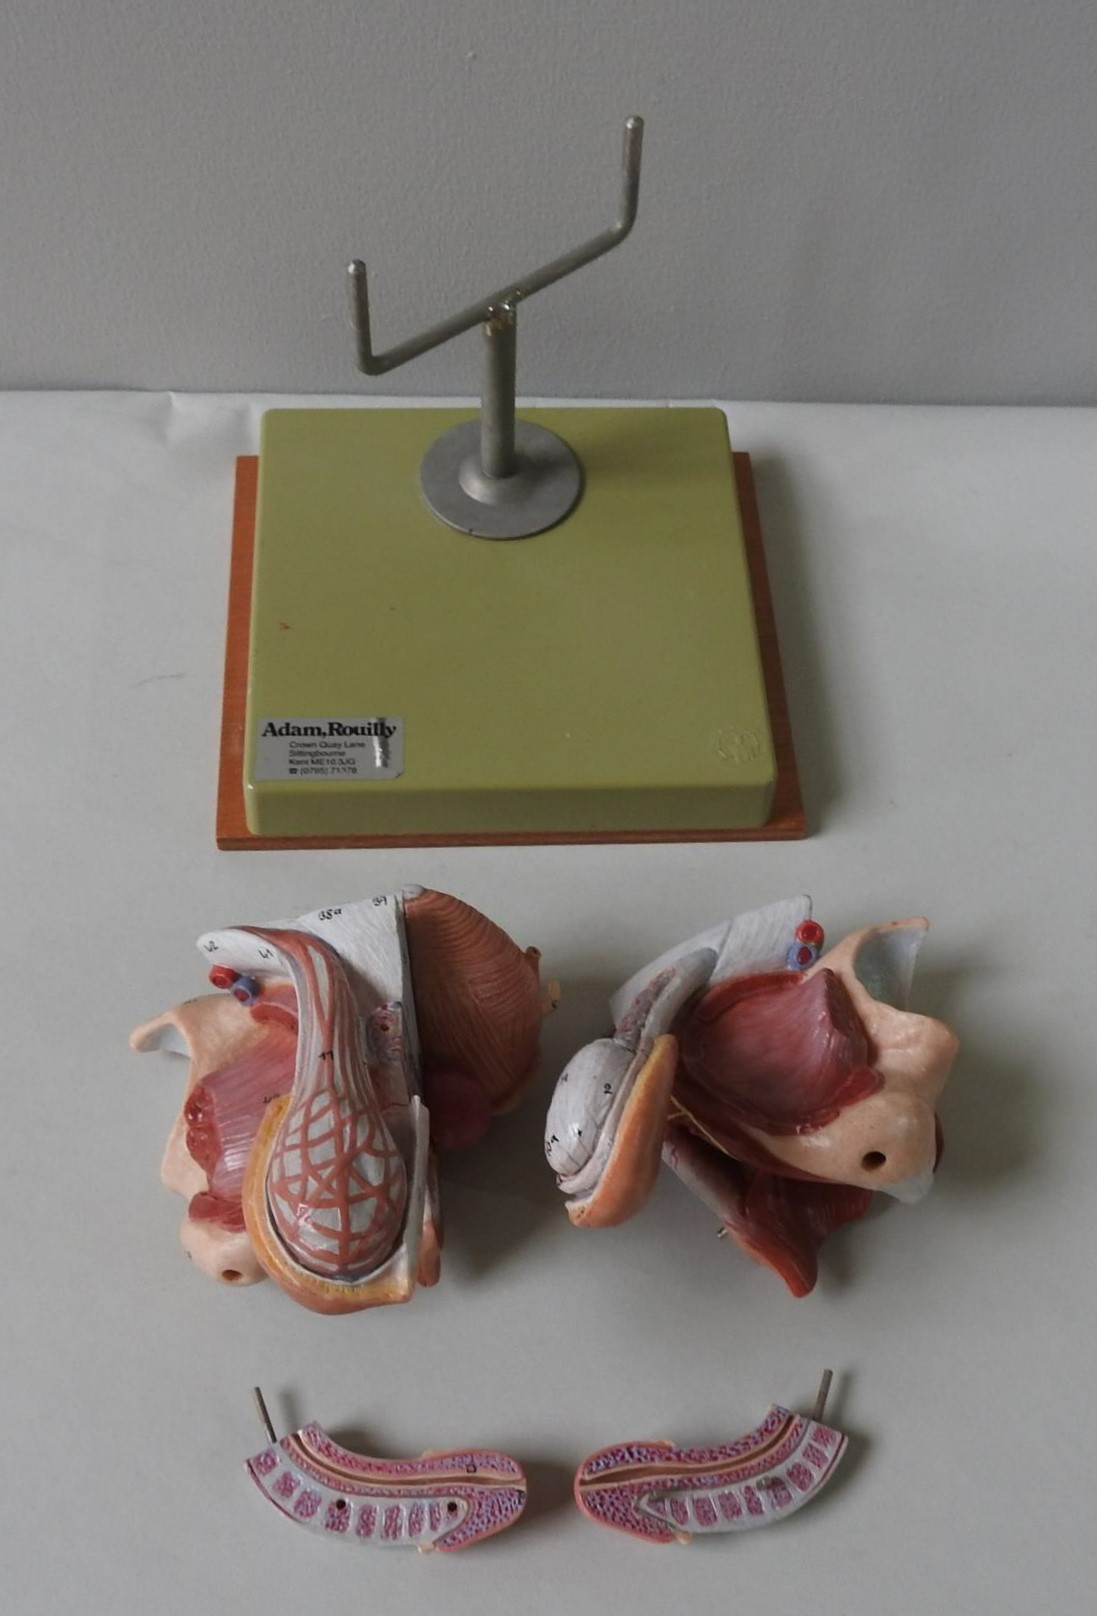 TWO VINTAGE SOMSO ANATOMY MODELS OF MALE AND FEMALE GENITALIA - Image 3 of 3